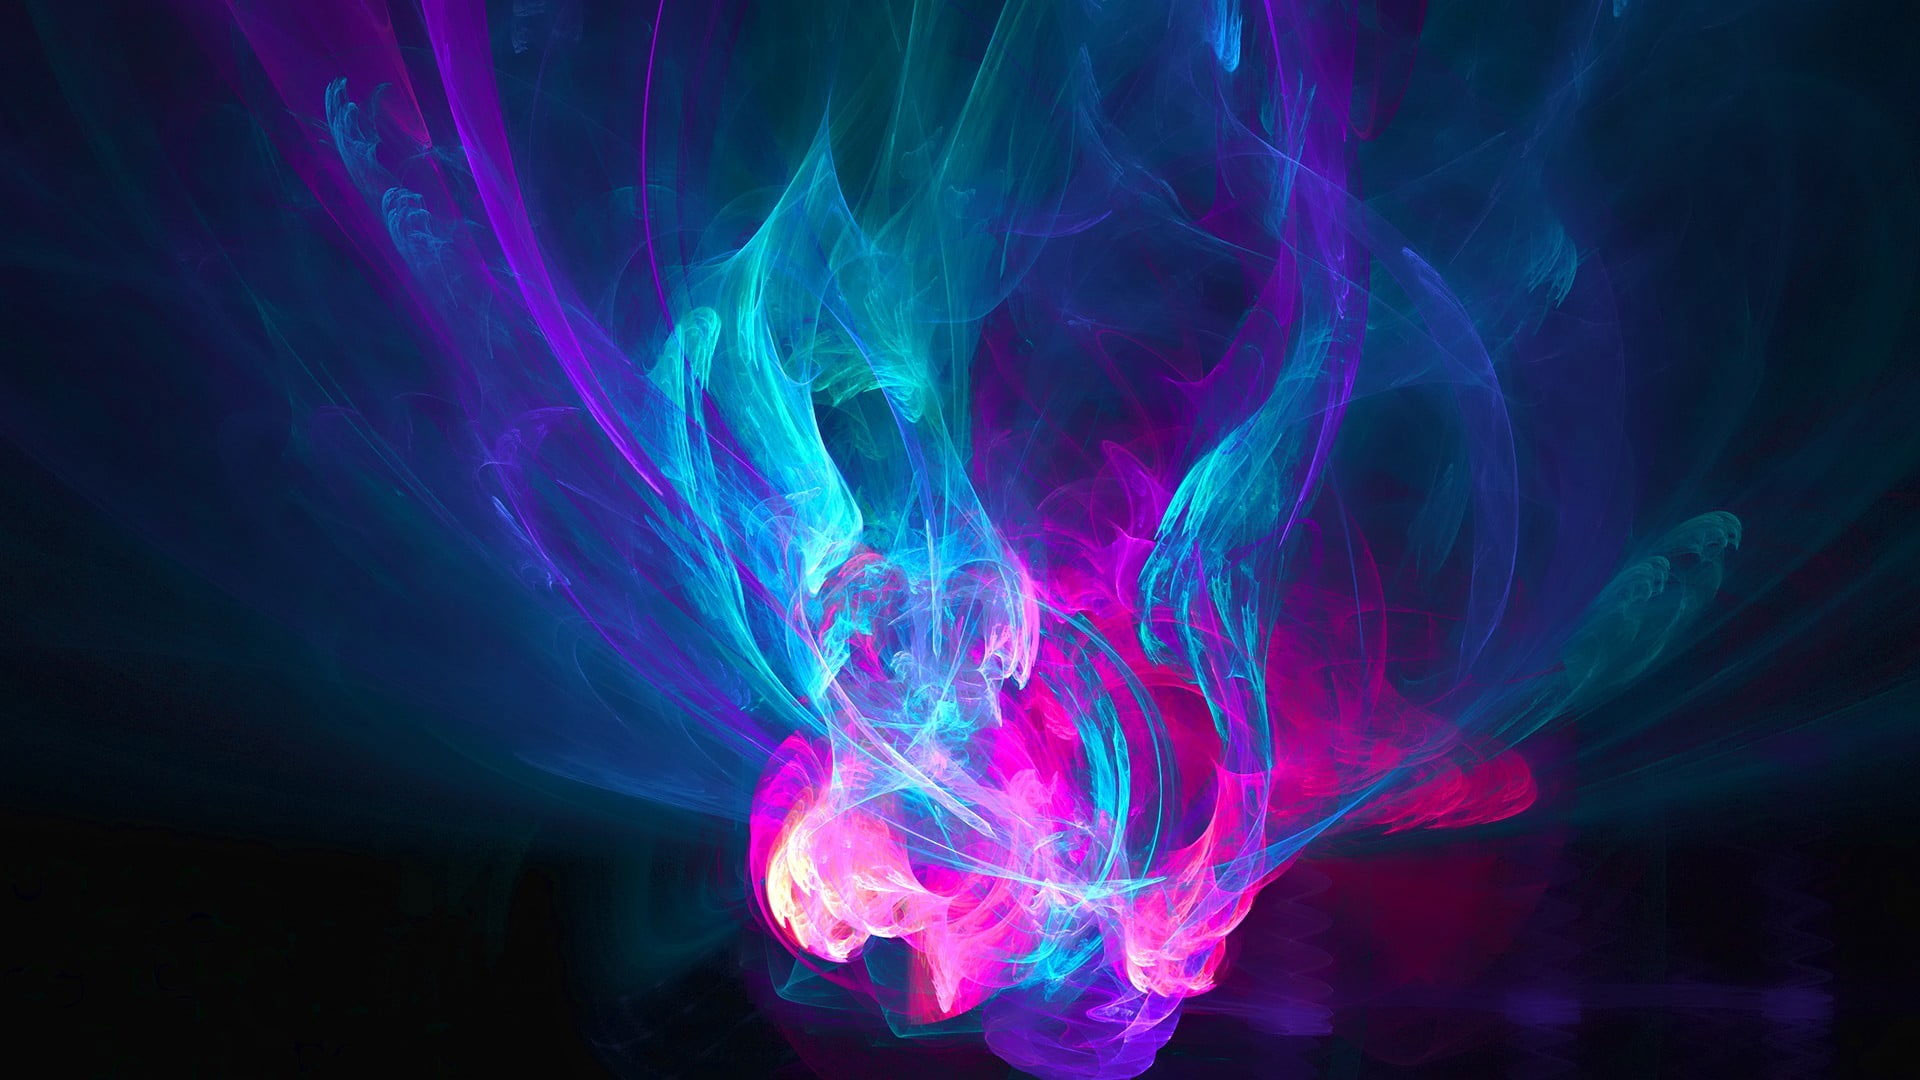 Wallpaper Teal, Pink, And Blue Flame